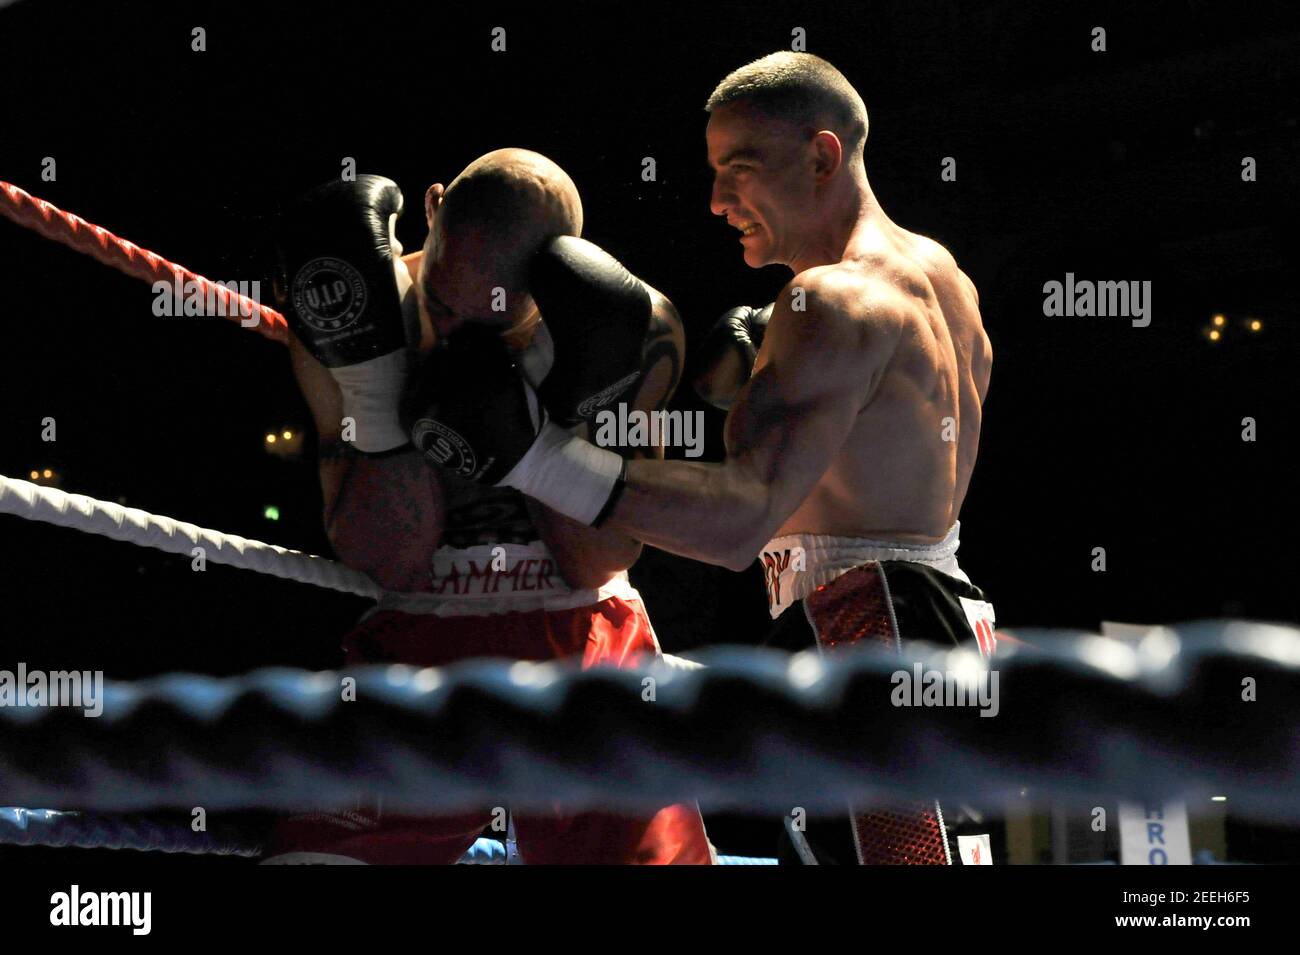 Boxing - Lee Crossland v Kieron Gray - Middleweight - Winter Gardens,  Blackpool - 12/13 - 5/10/12 Lee Crossland (R) in action against Kieron Gray  Mandatory Credit: Action Images / Adam Holt Stock Photo - Alamy